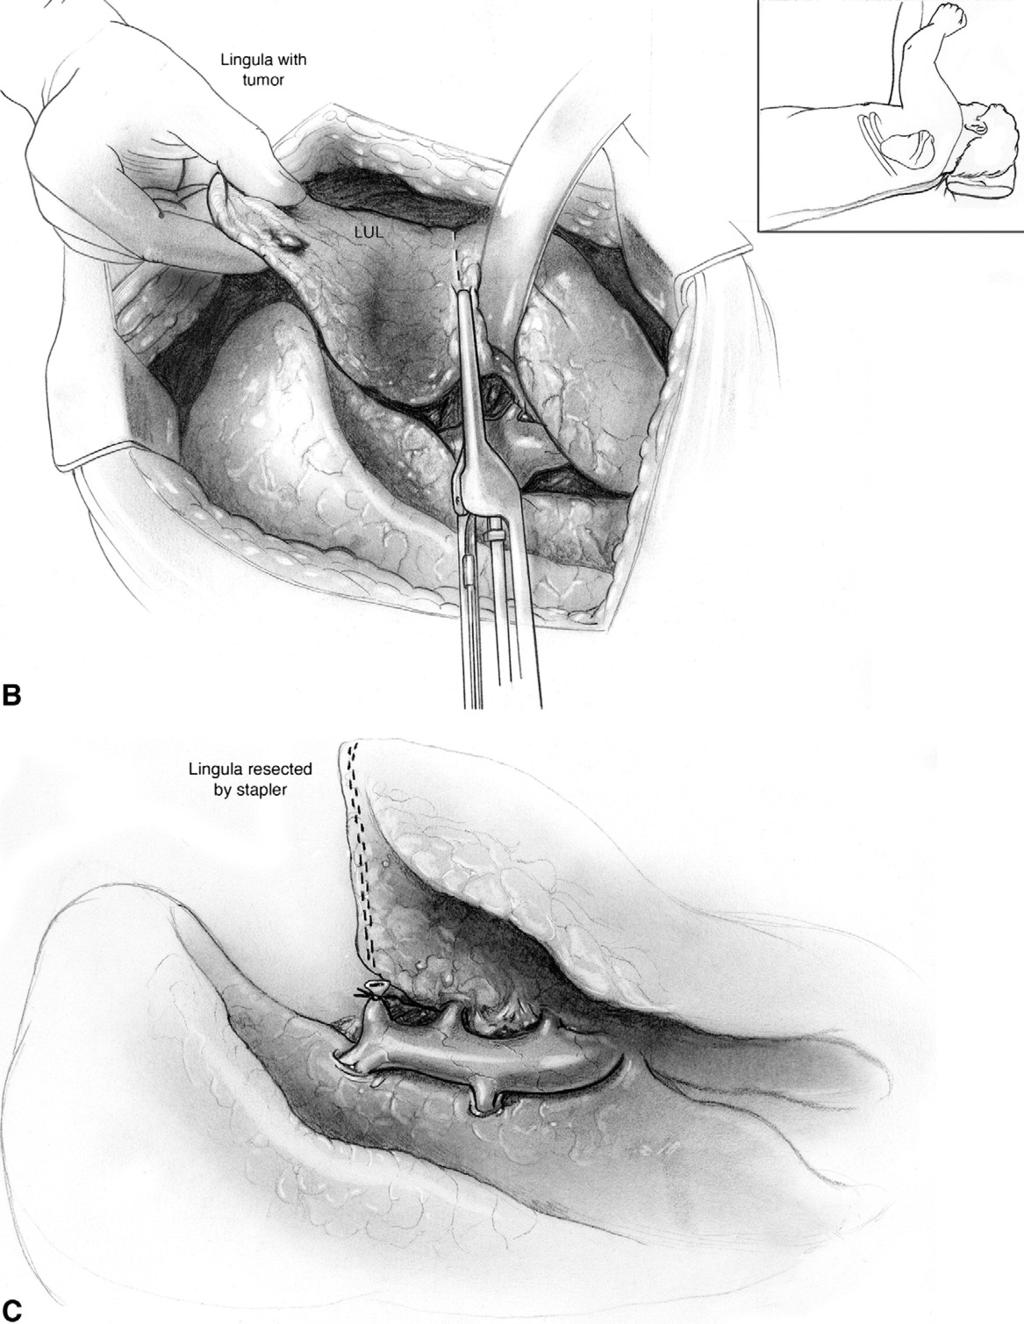 314 B.A. Whitson, R.S. Andrade, and M.A. Maddaus Figure 3 (Continued) (B) Along the line of demarcation, the lingula is removed from the surrounding parenchyma using repeated linear stapler applications with 4.